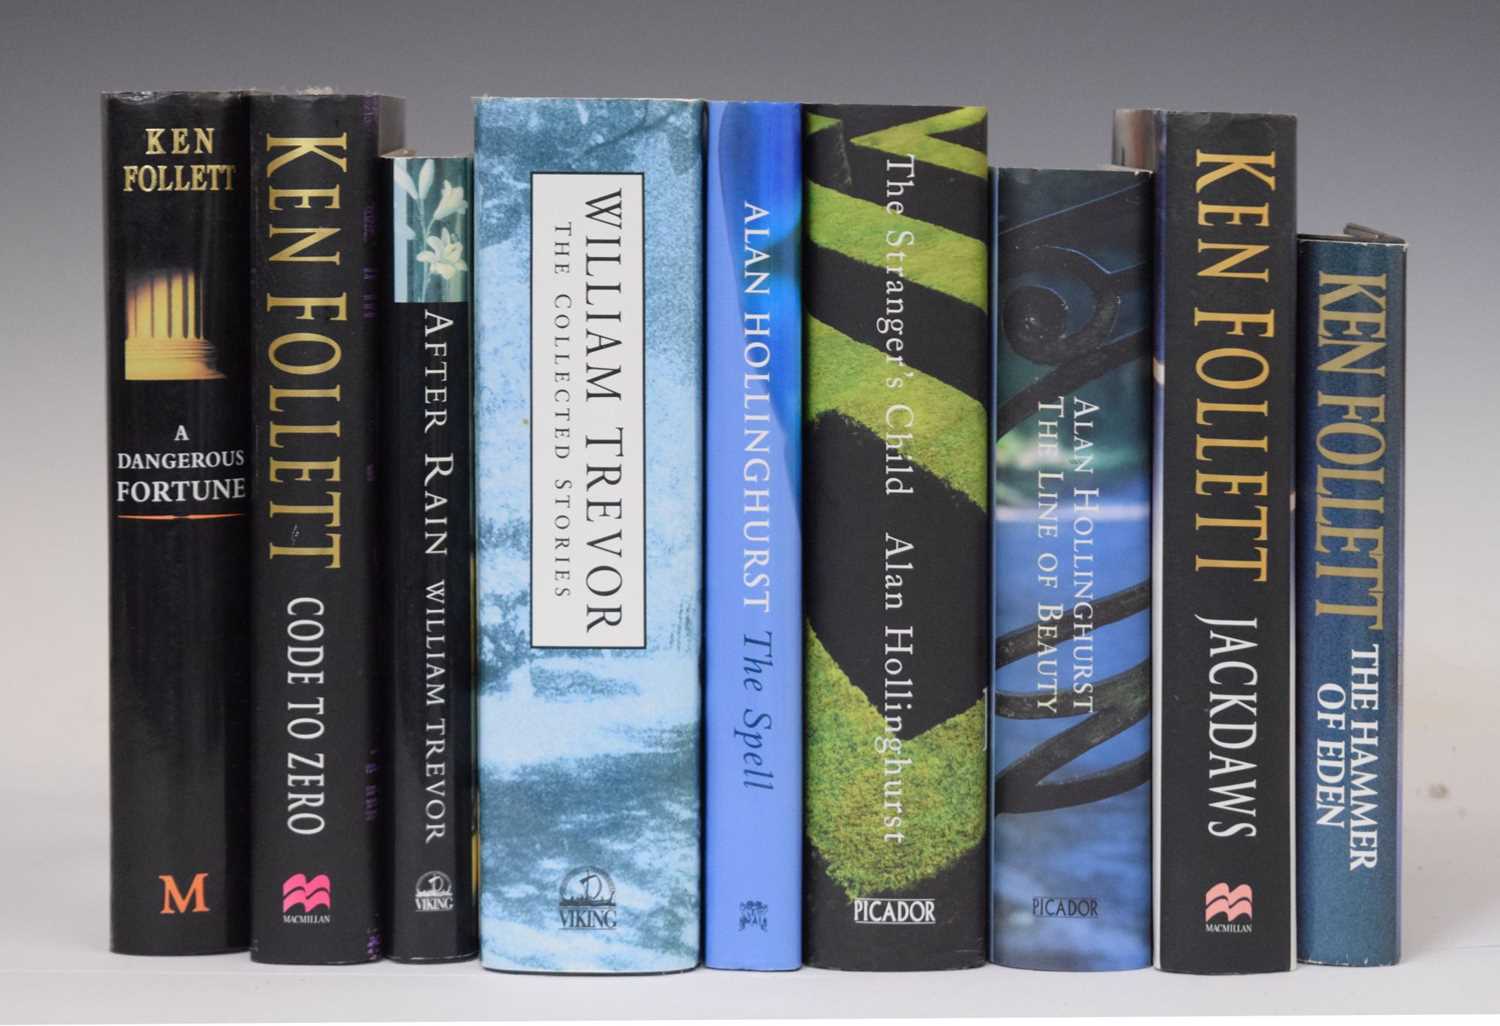 First and early editions of best-selling works by Alan Hollinghurst, William Trevor, and Ken Follett